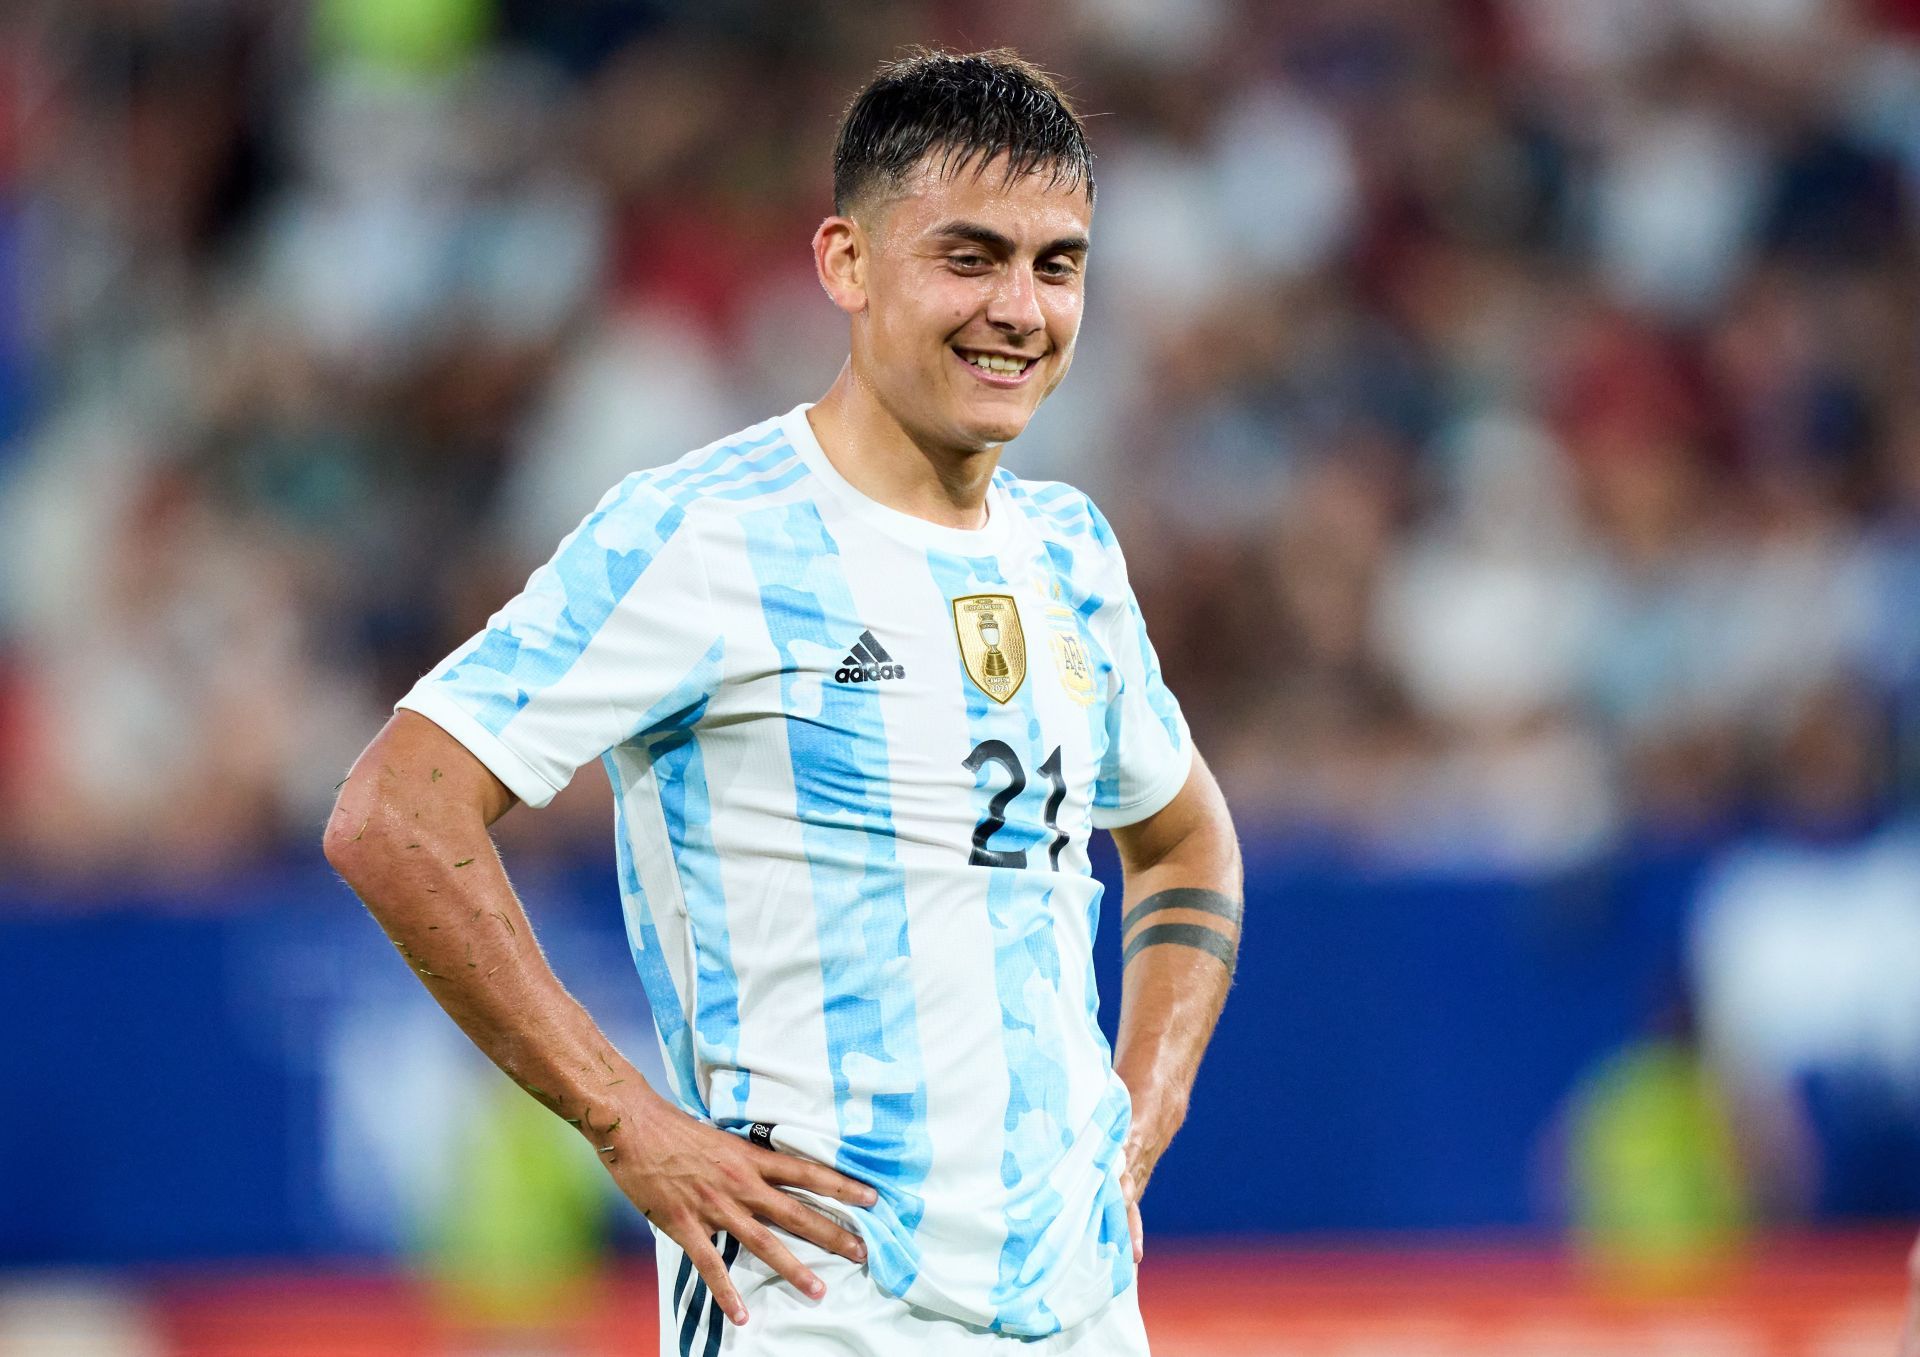 Will AS Roma be able to secure Paulo Dybala on a free transfer this summer?